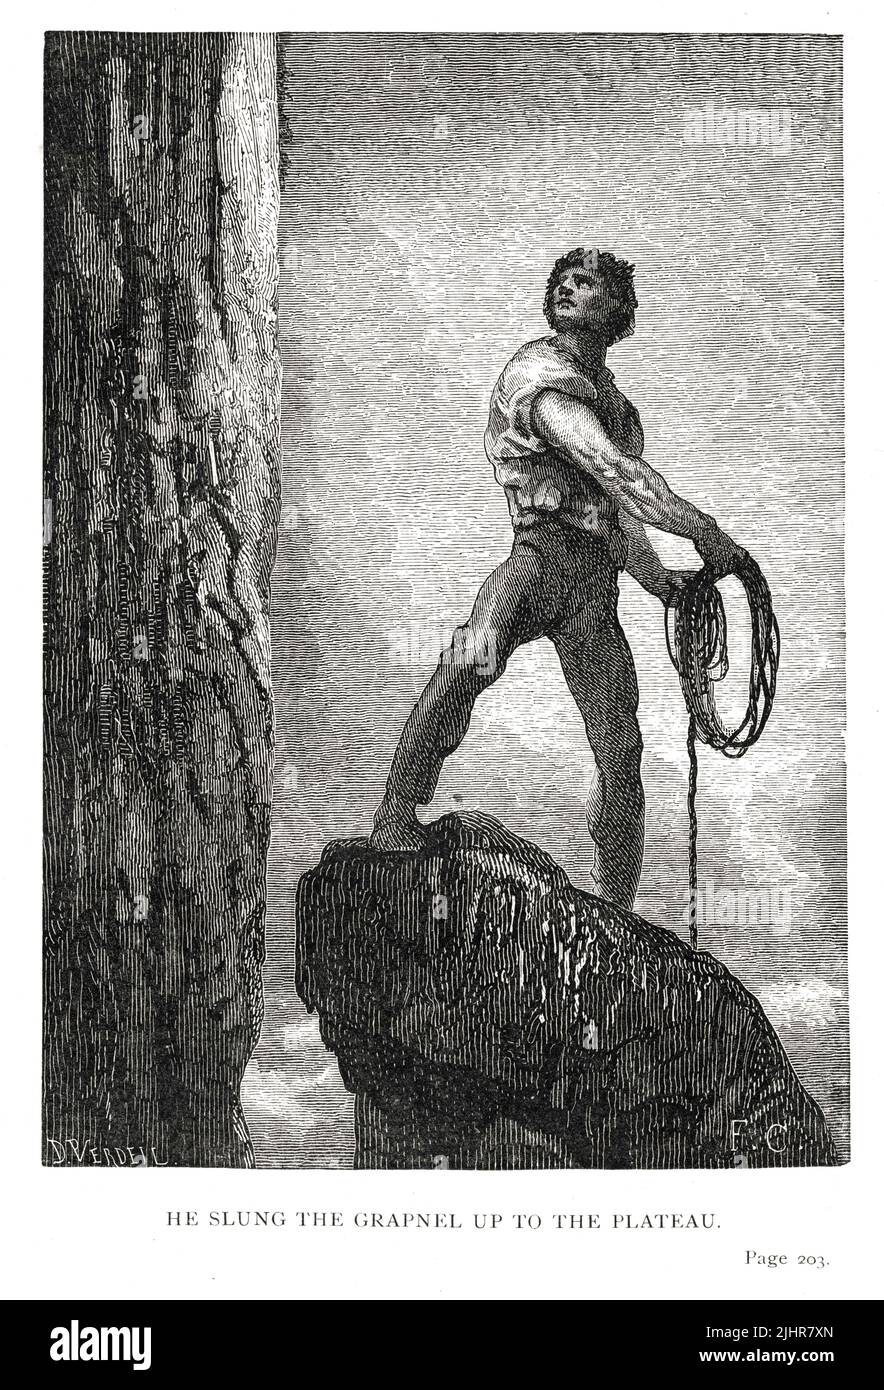 Gilliatt finds refuge in the Durande: 'He detached the knotted rope from his belt, took a rapid glance at the dimensions of the rock, and slung the grapnel up to the plateau.' Second part, Book I, chapter VII.  Illustration from a set of 56 engravings published in the English edition of 'Les Travailleurs de la Mer' ('Toilers of the Sea'), by Victor Hugo, published in 1869 by Sampson Low, Son and Marston.  Illustrator: François-Nicolas Chifflart. Engraver: D. Verdeil. Stock Photo